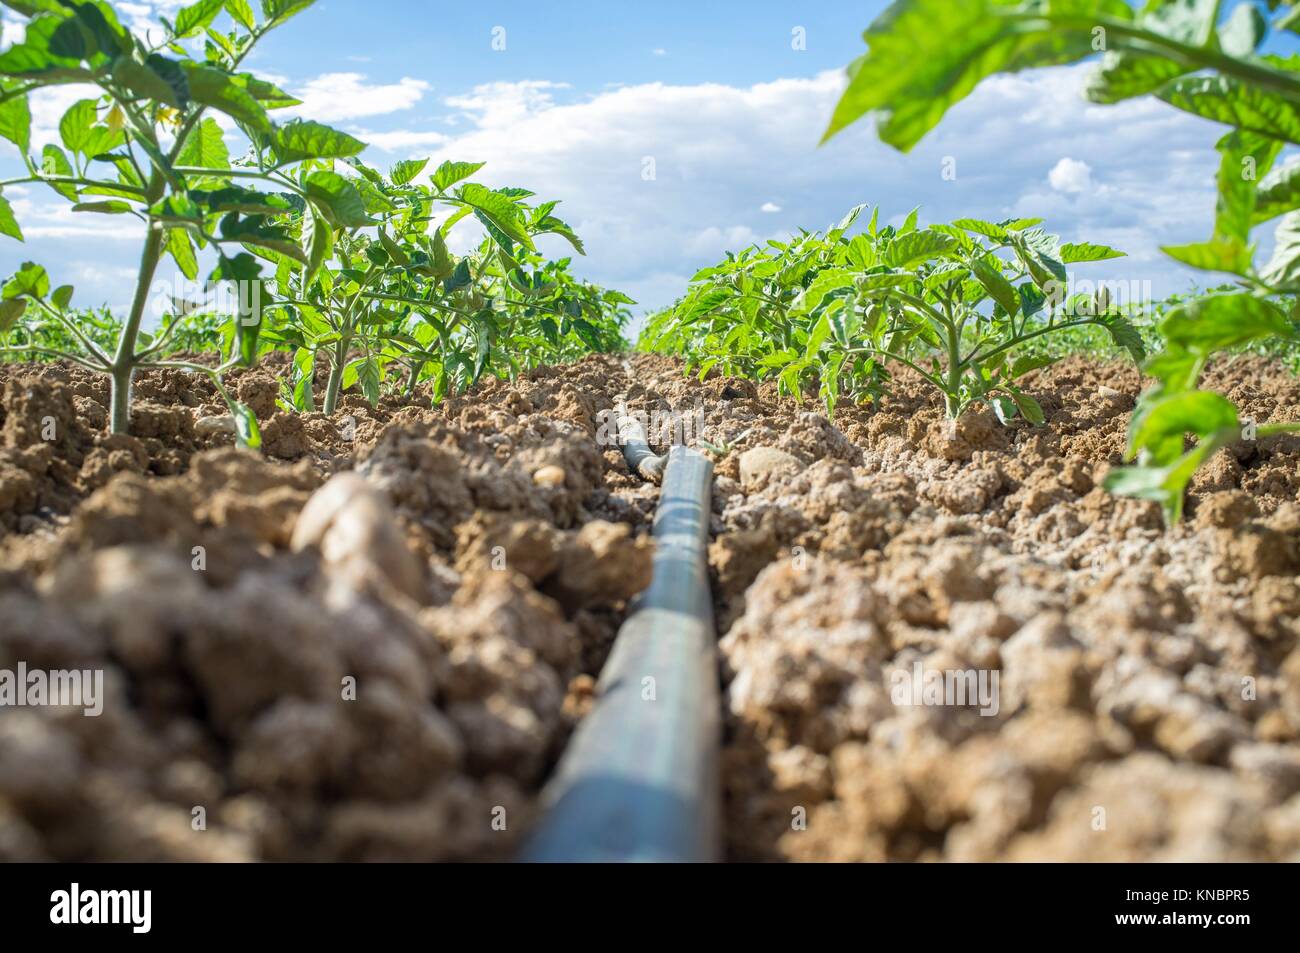 Young tomato plant growing with drip irrigation system. Ground level view. Stock Photo